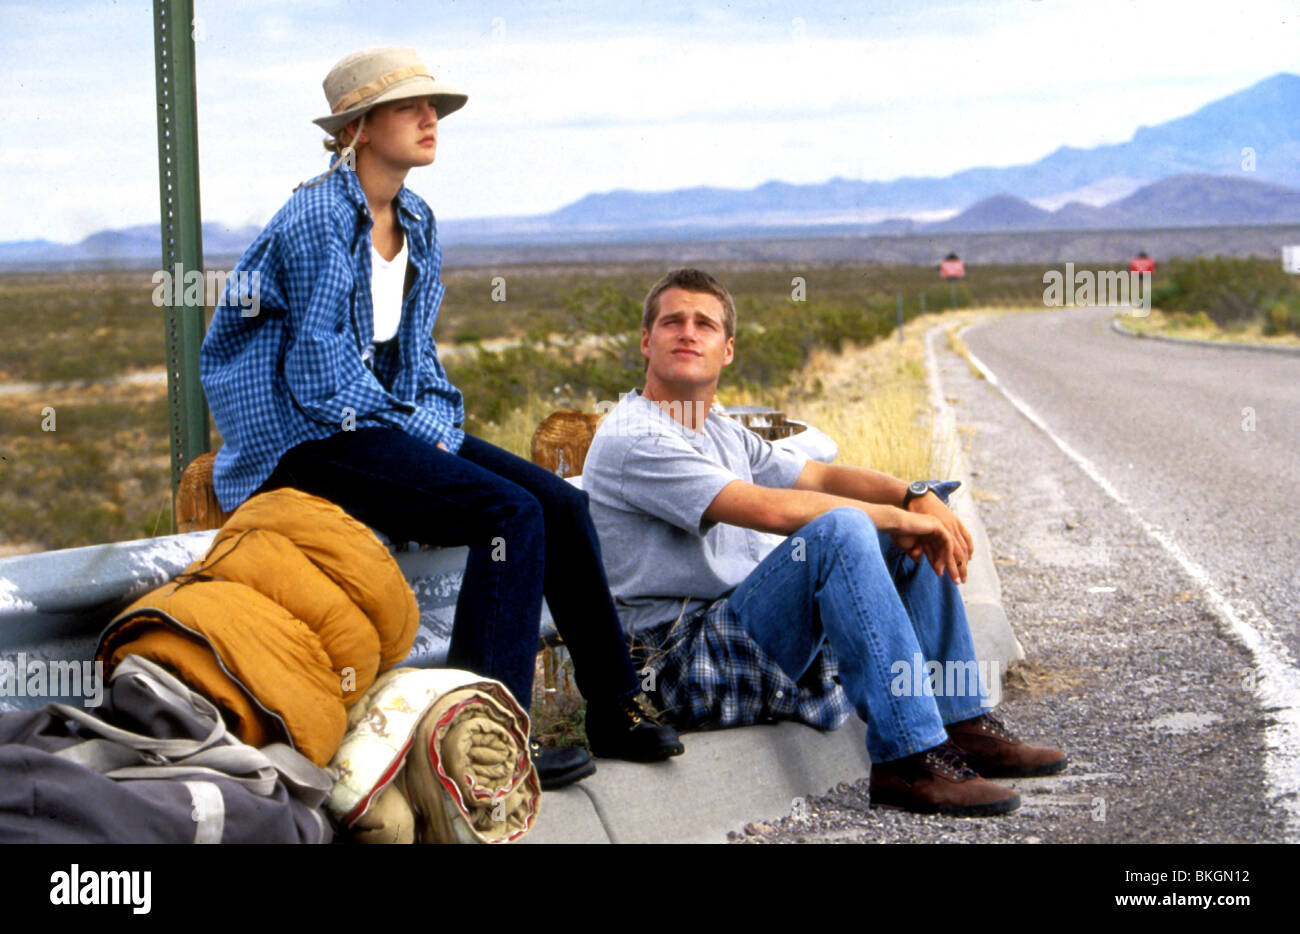 MAD LOVE (1995), DREW BARRYMORE, CHRIS O' DONNELL MADL 014 Stockfoto